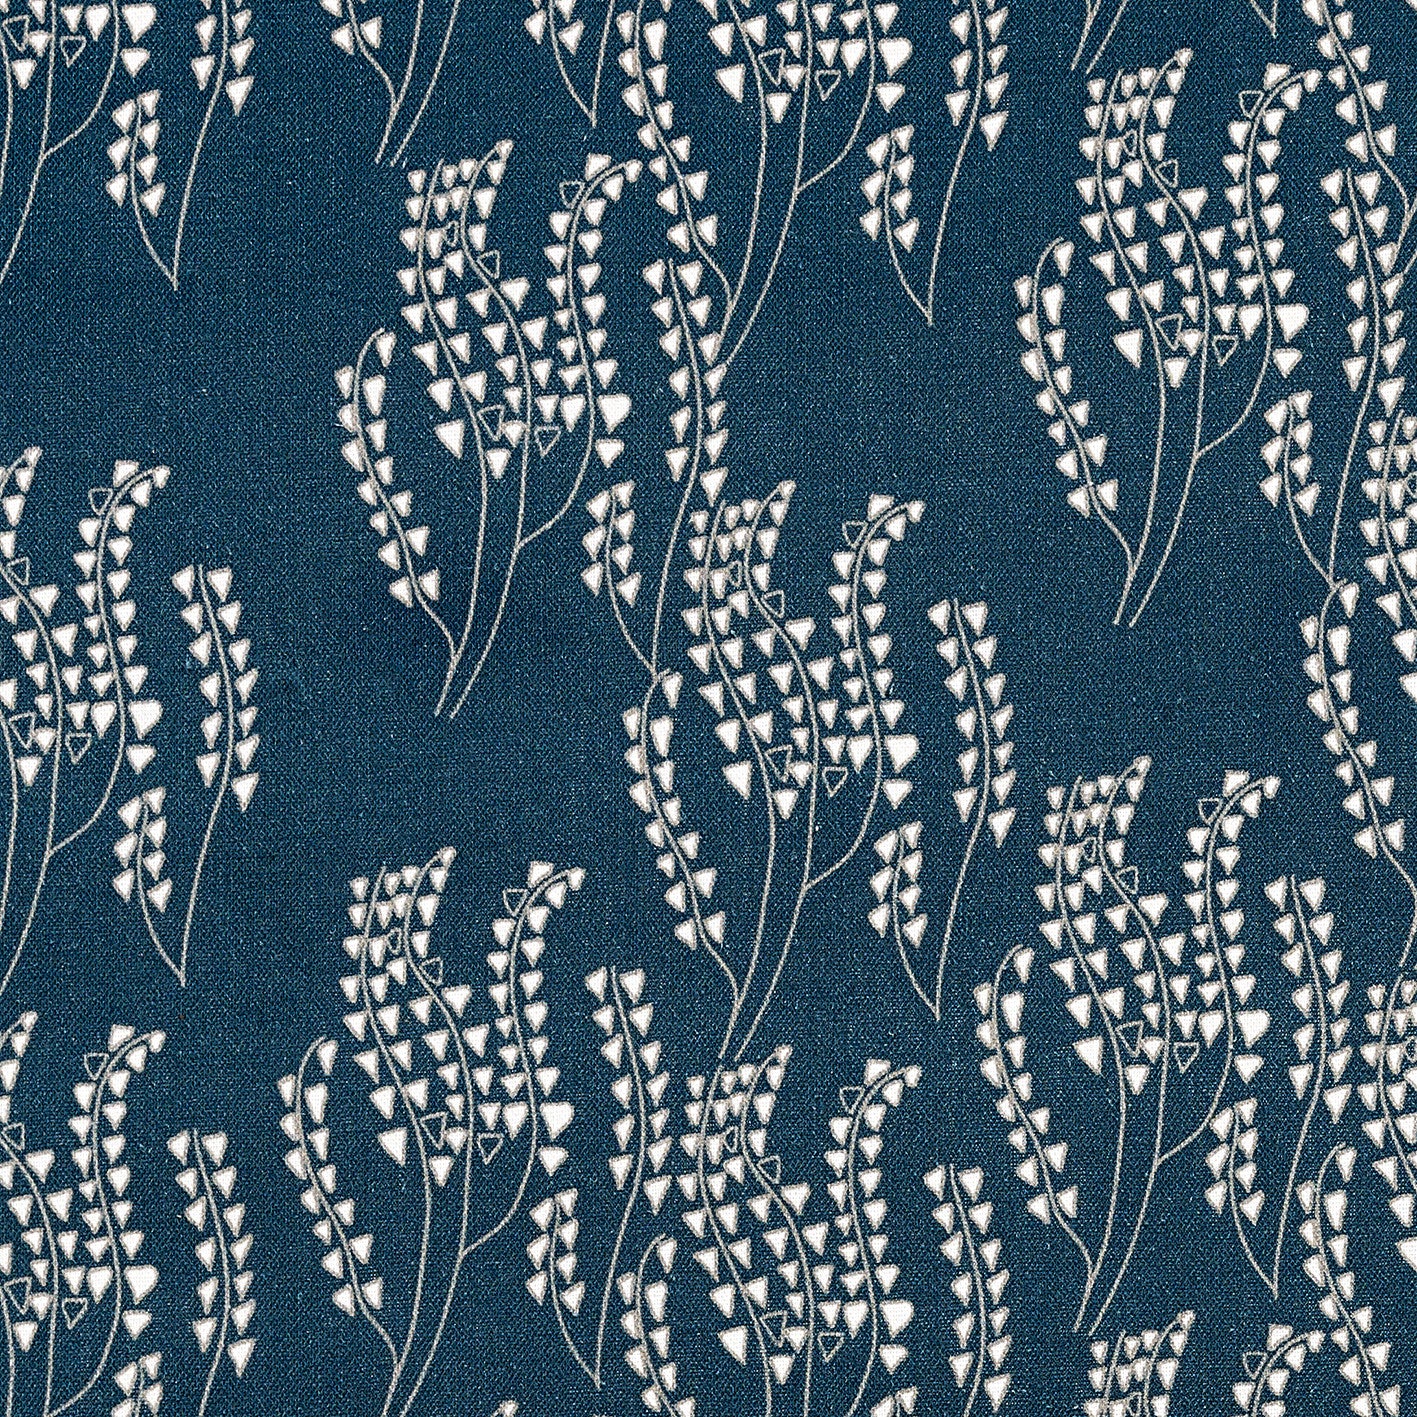 Maricopa Graphic Floral Pattern Cotton Linen Home Decor Fabric by the meter or by the yard for curtains, blinds or upholstery in Dark Petrol Blue and Grey ships from Canada worldwide (USA)